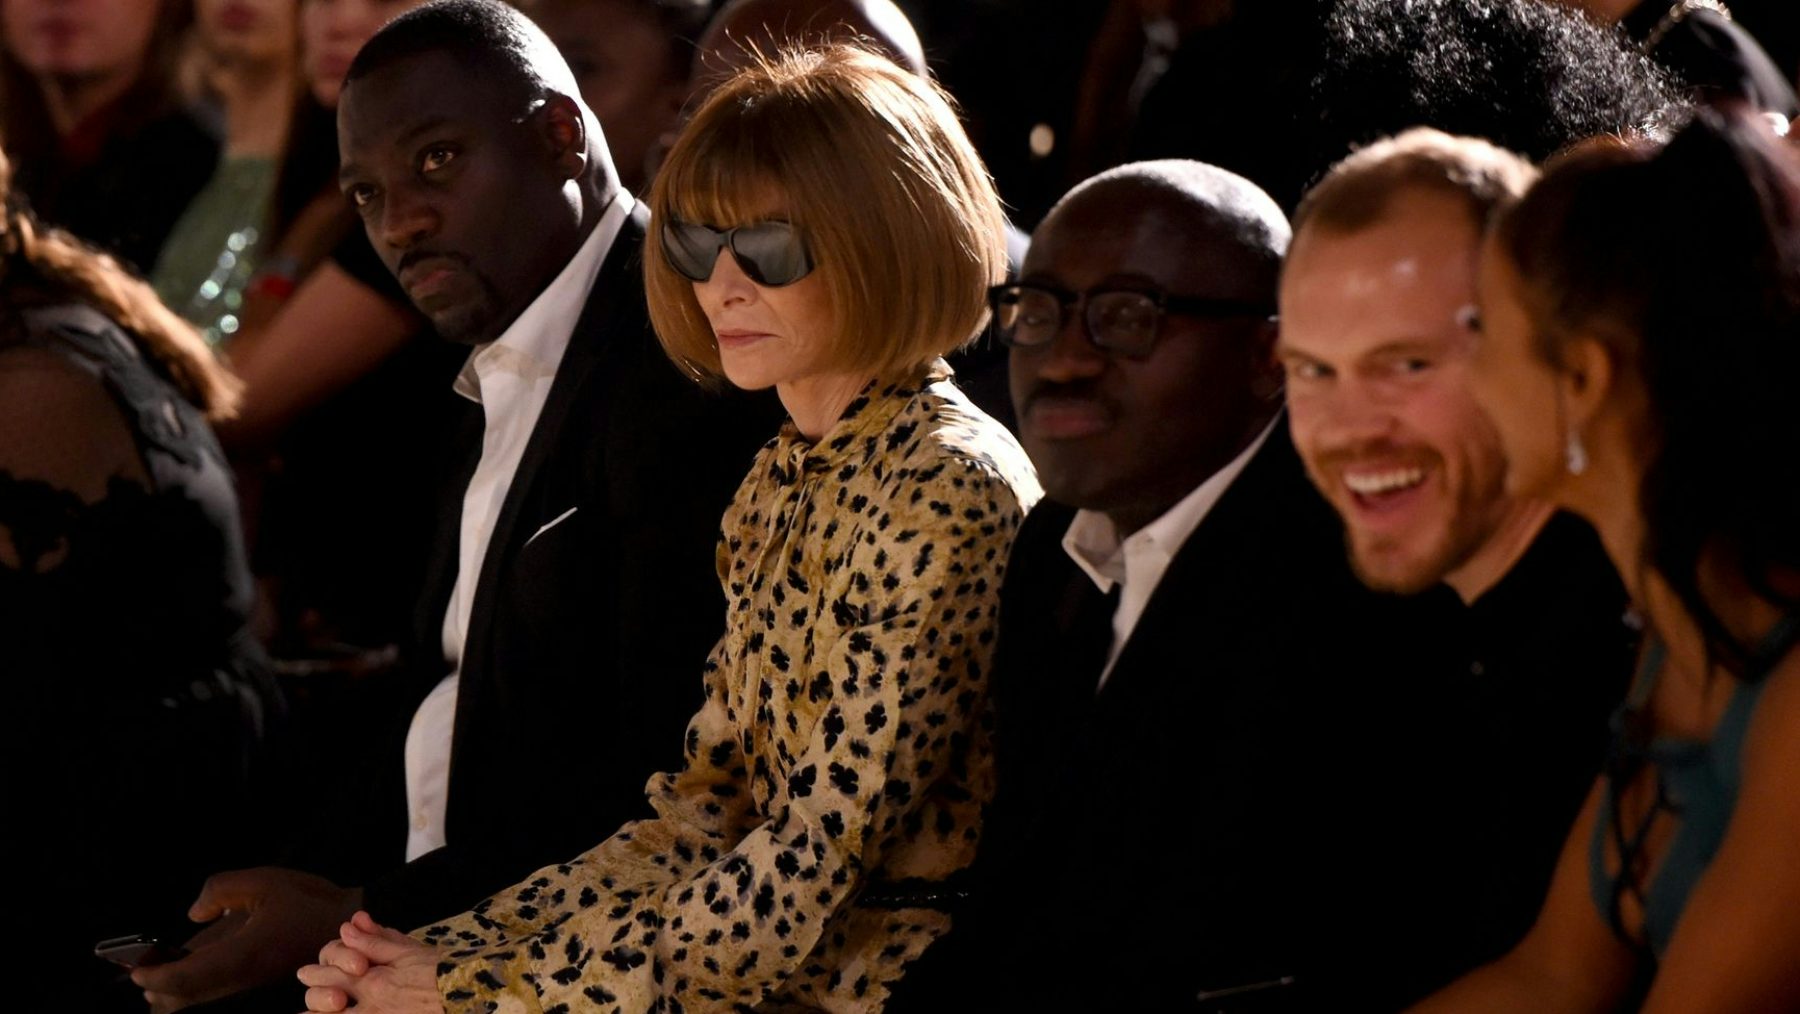 Anna Wintour and Edward Enninful in London. Getty Images.